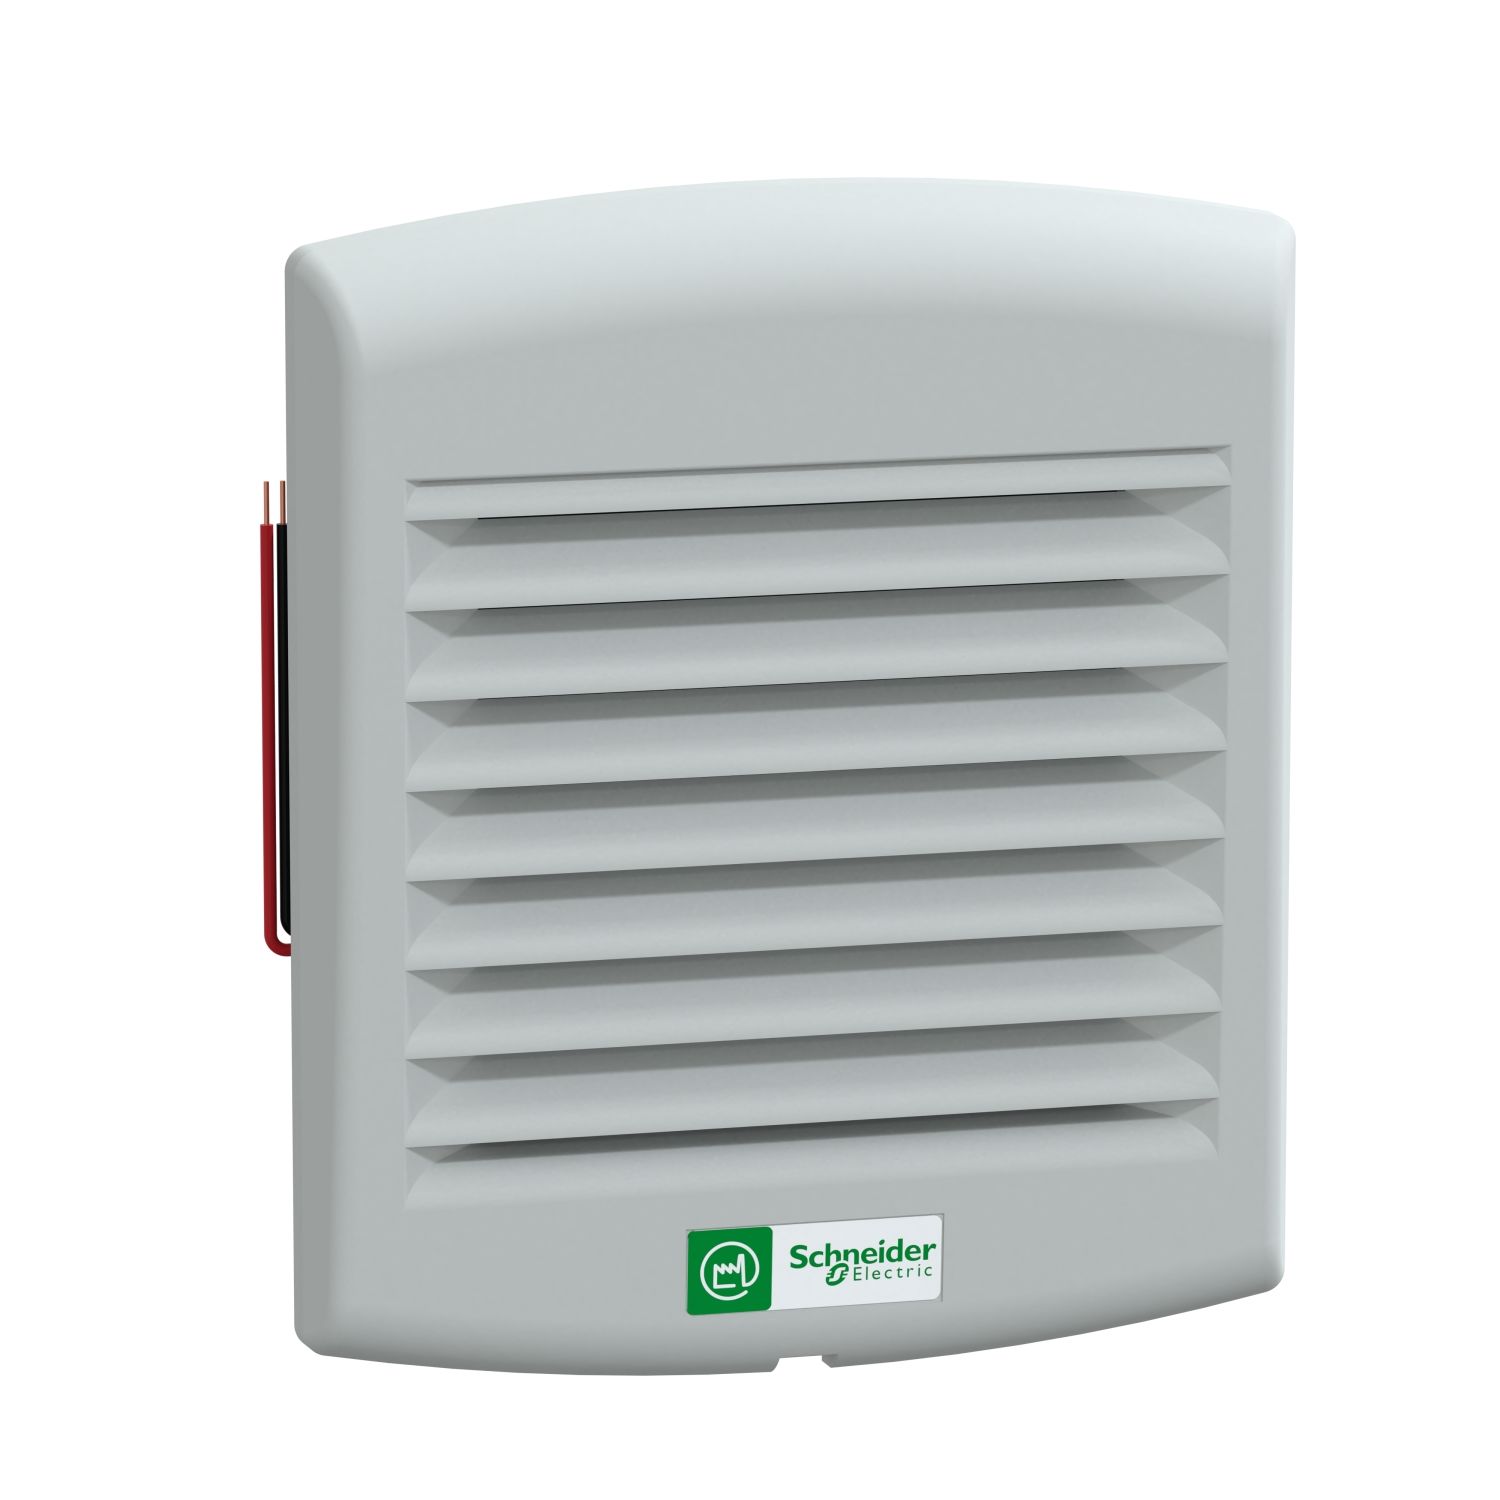 NSYCVF38M24DPF ClimaSys forced vent. IP54, 58m3/h, 24V DC, with outlet grille and filter G2